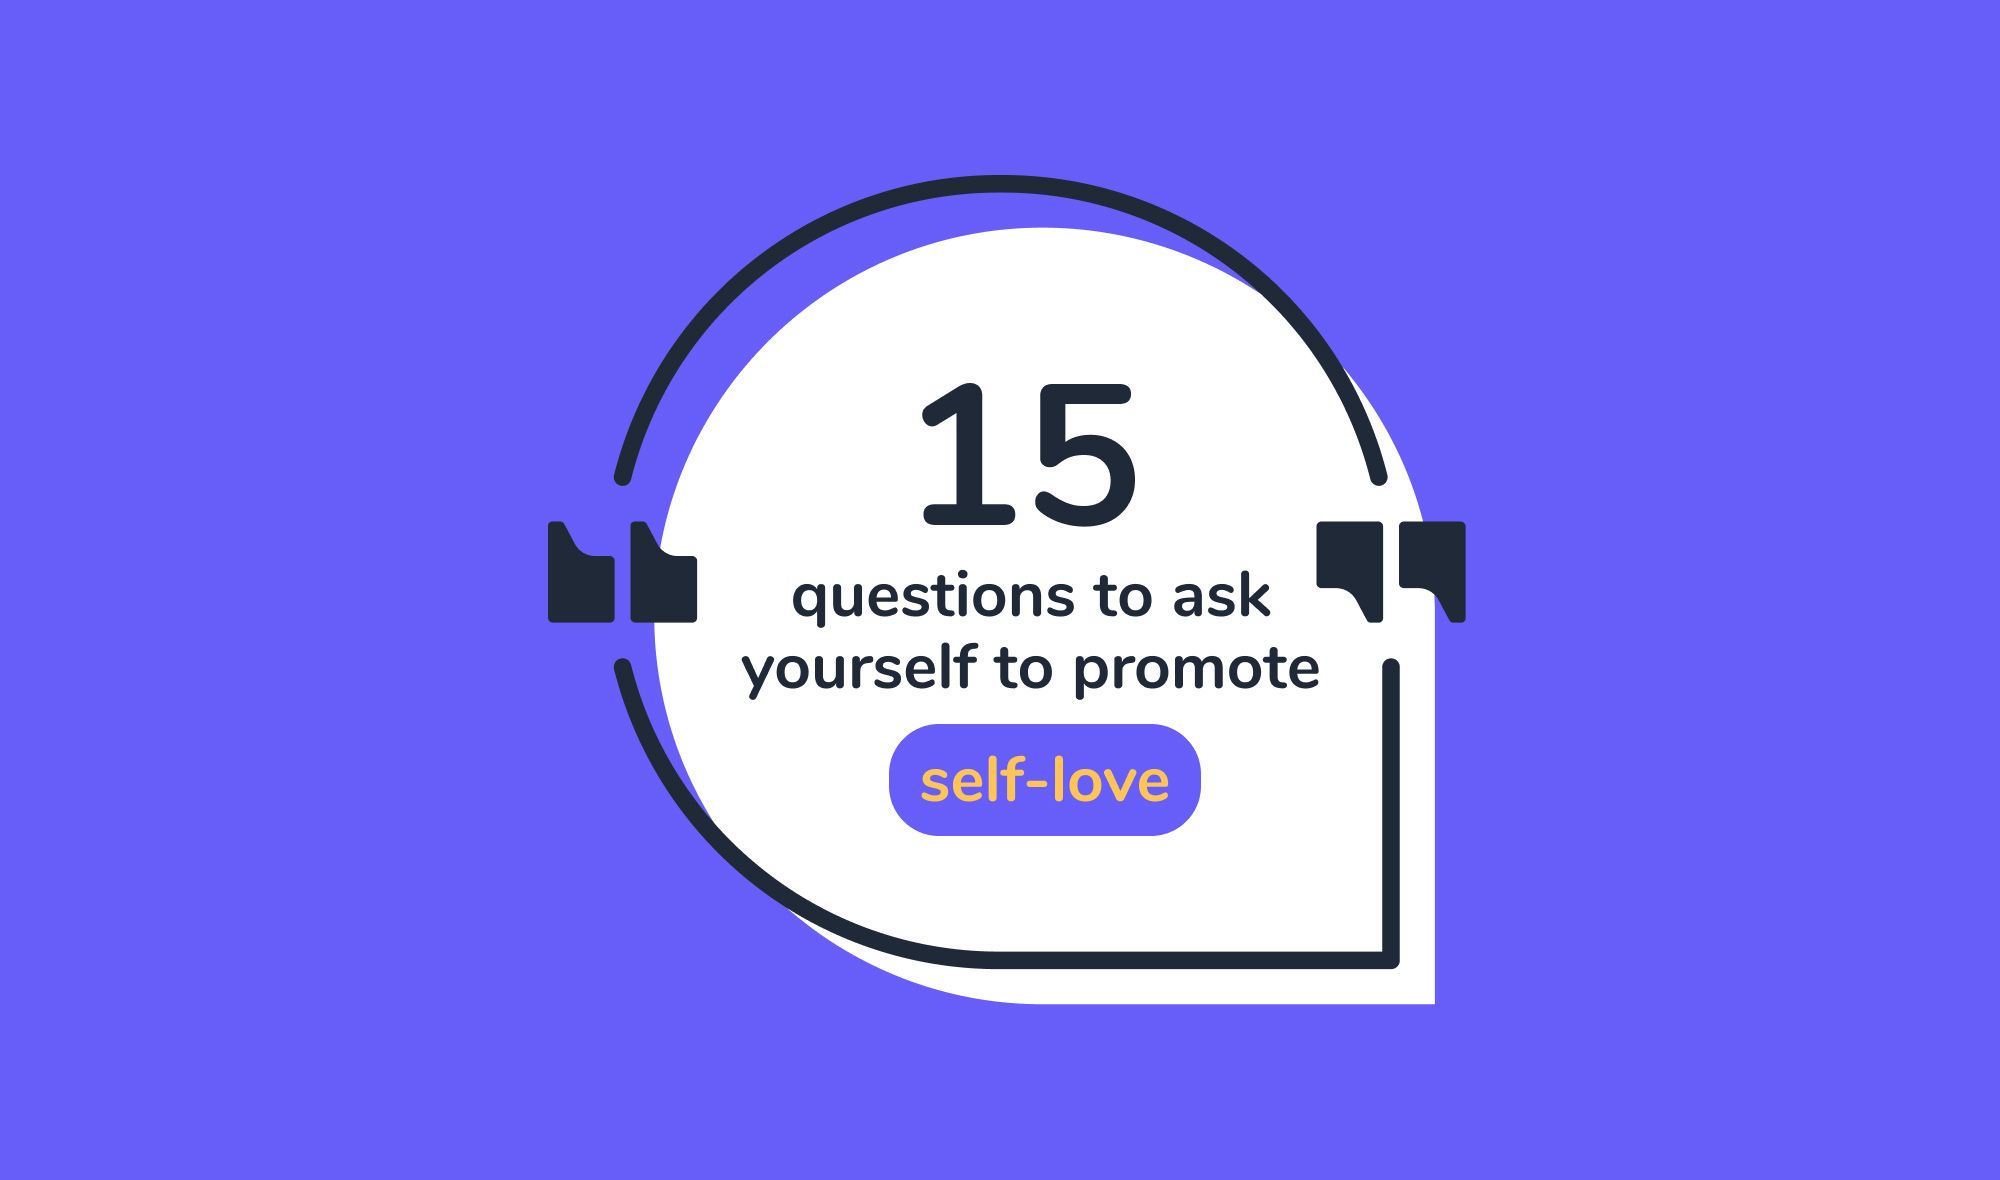 Self reflection questions - 15 questions to ask yourself to promote self-love